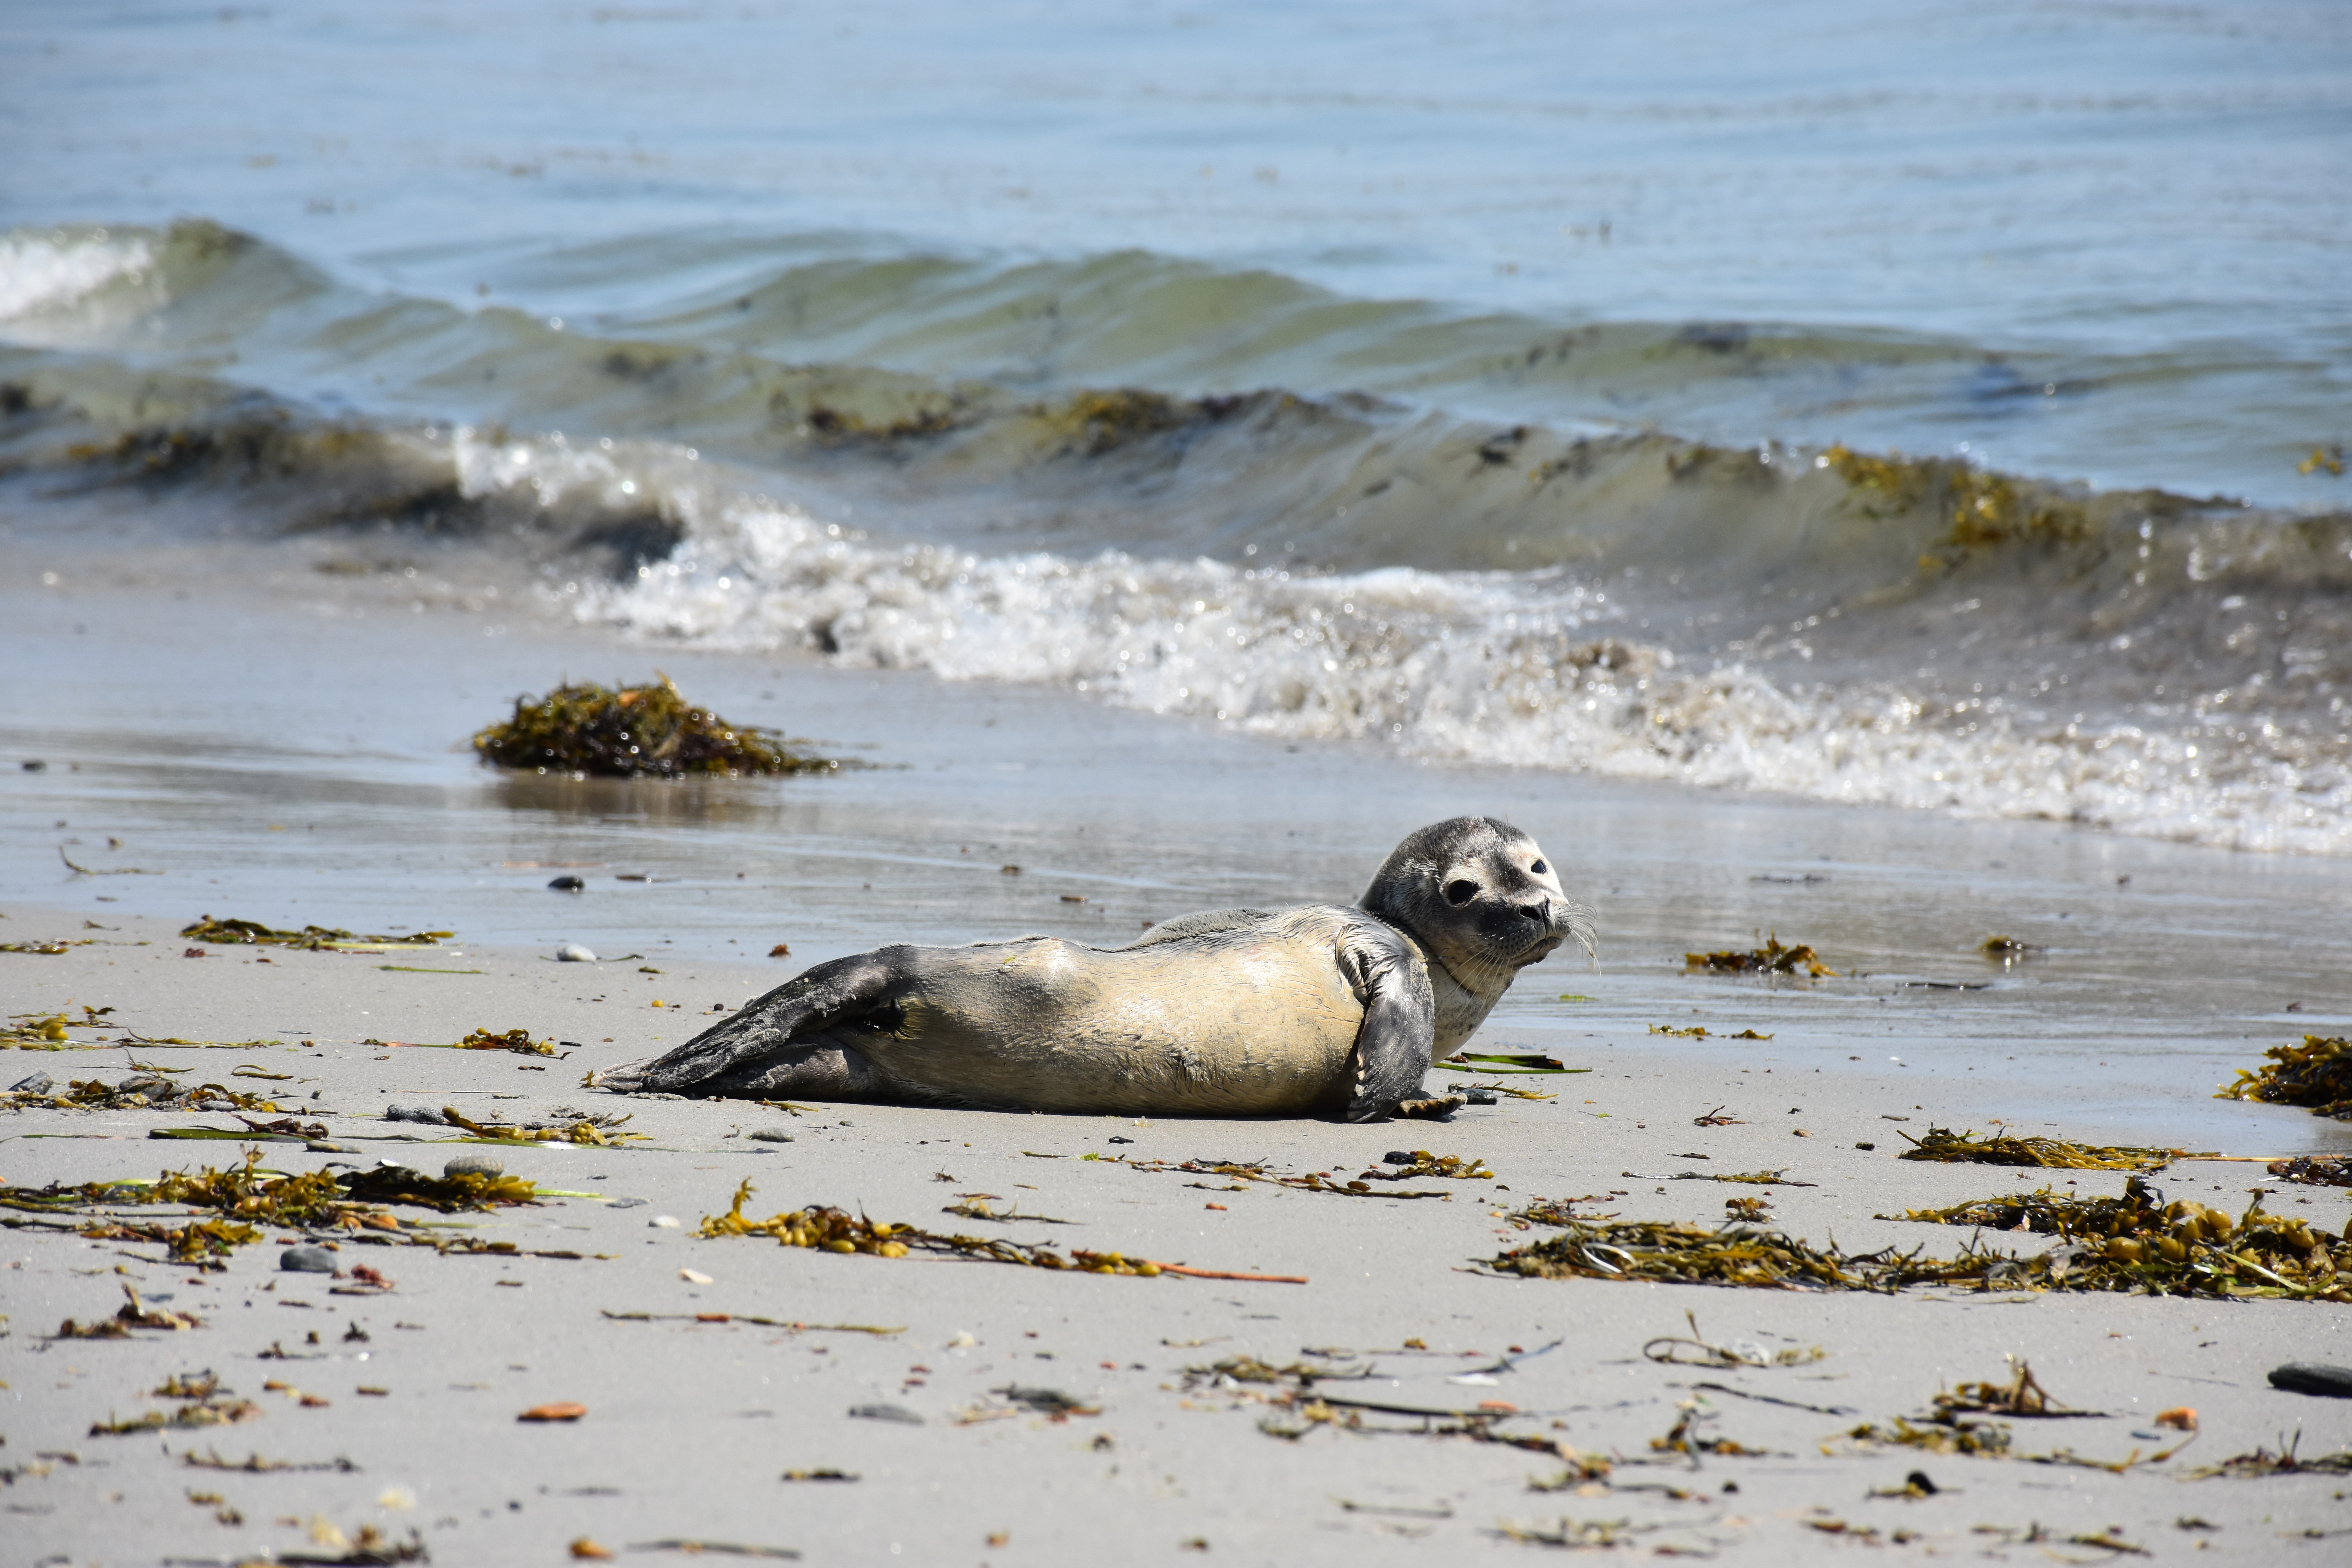 Image: Seal Week 2022: Celebrating Pinniped Science and Conservation